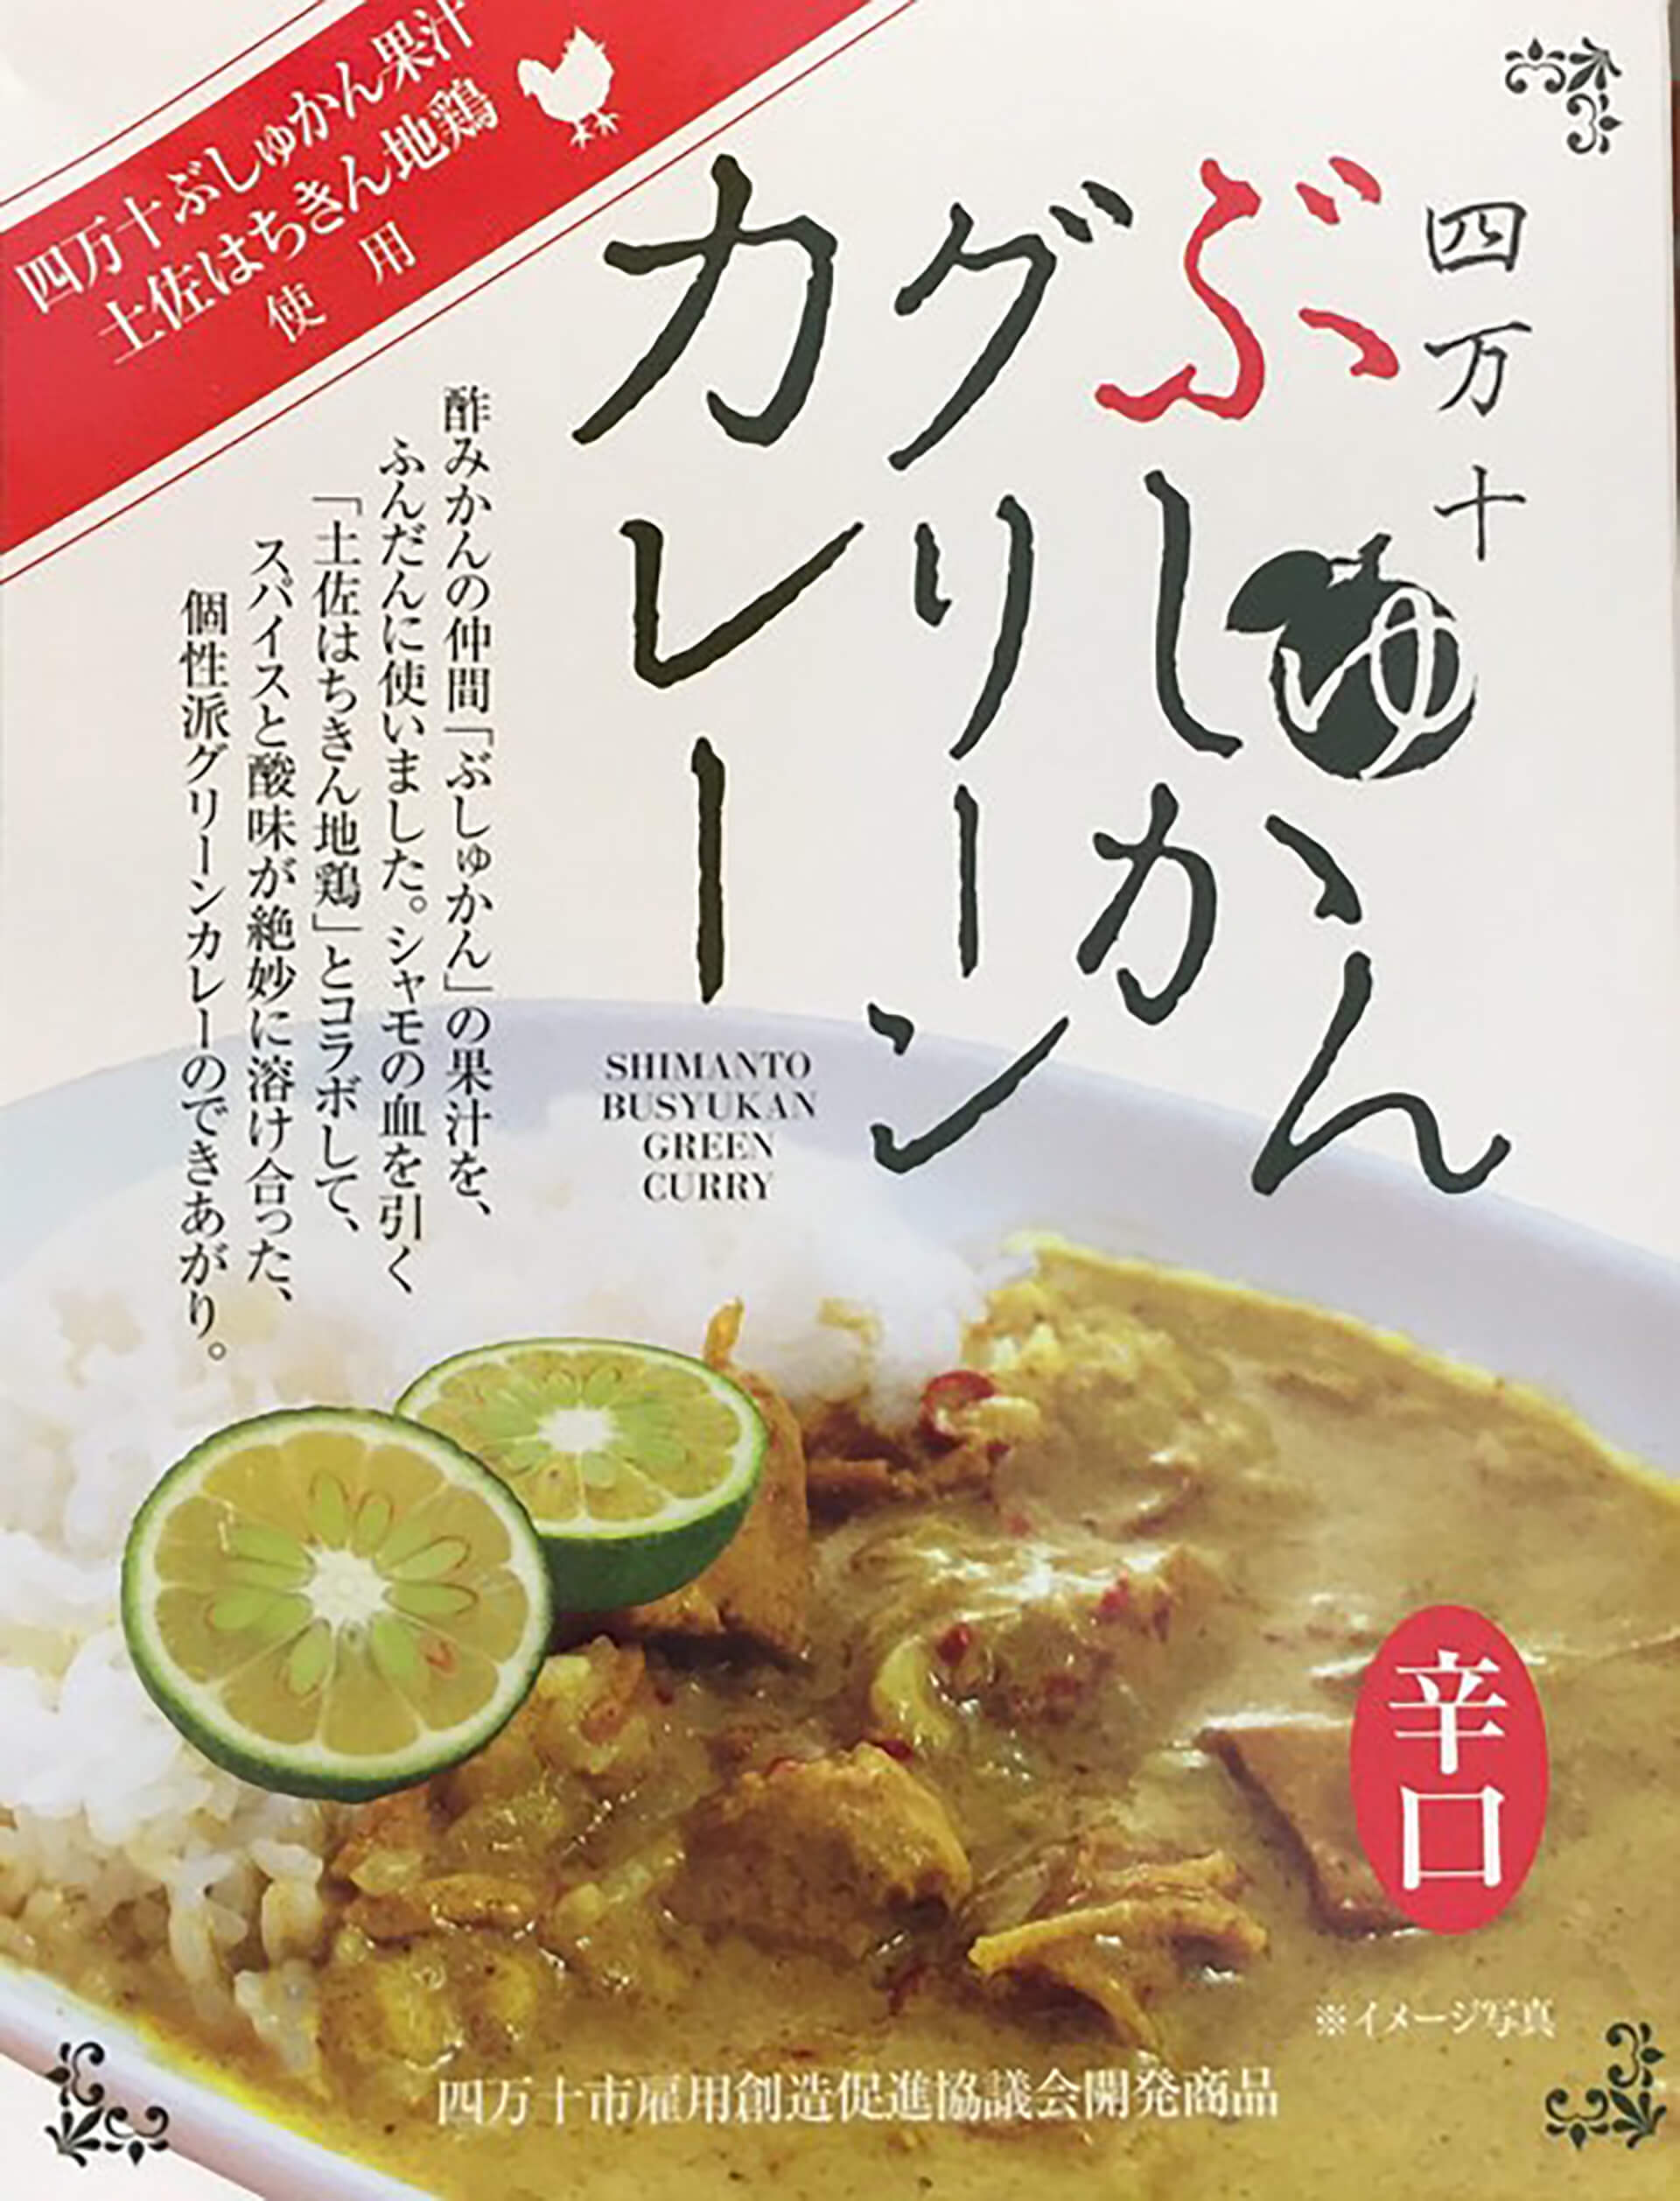 CURRY&MUSIC JAPAN2019